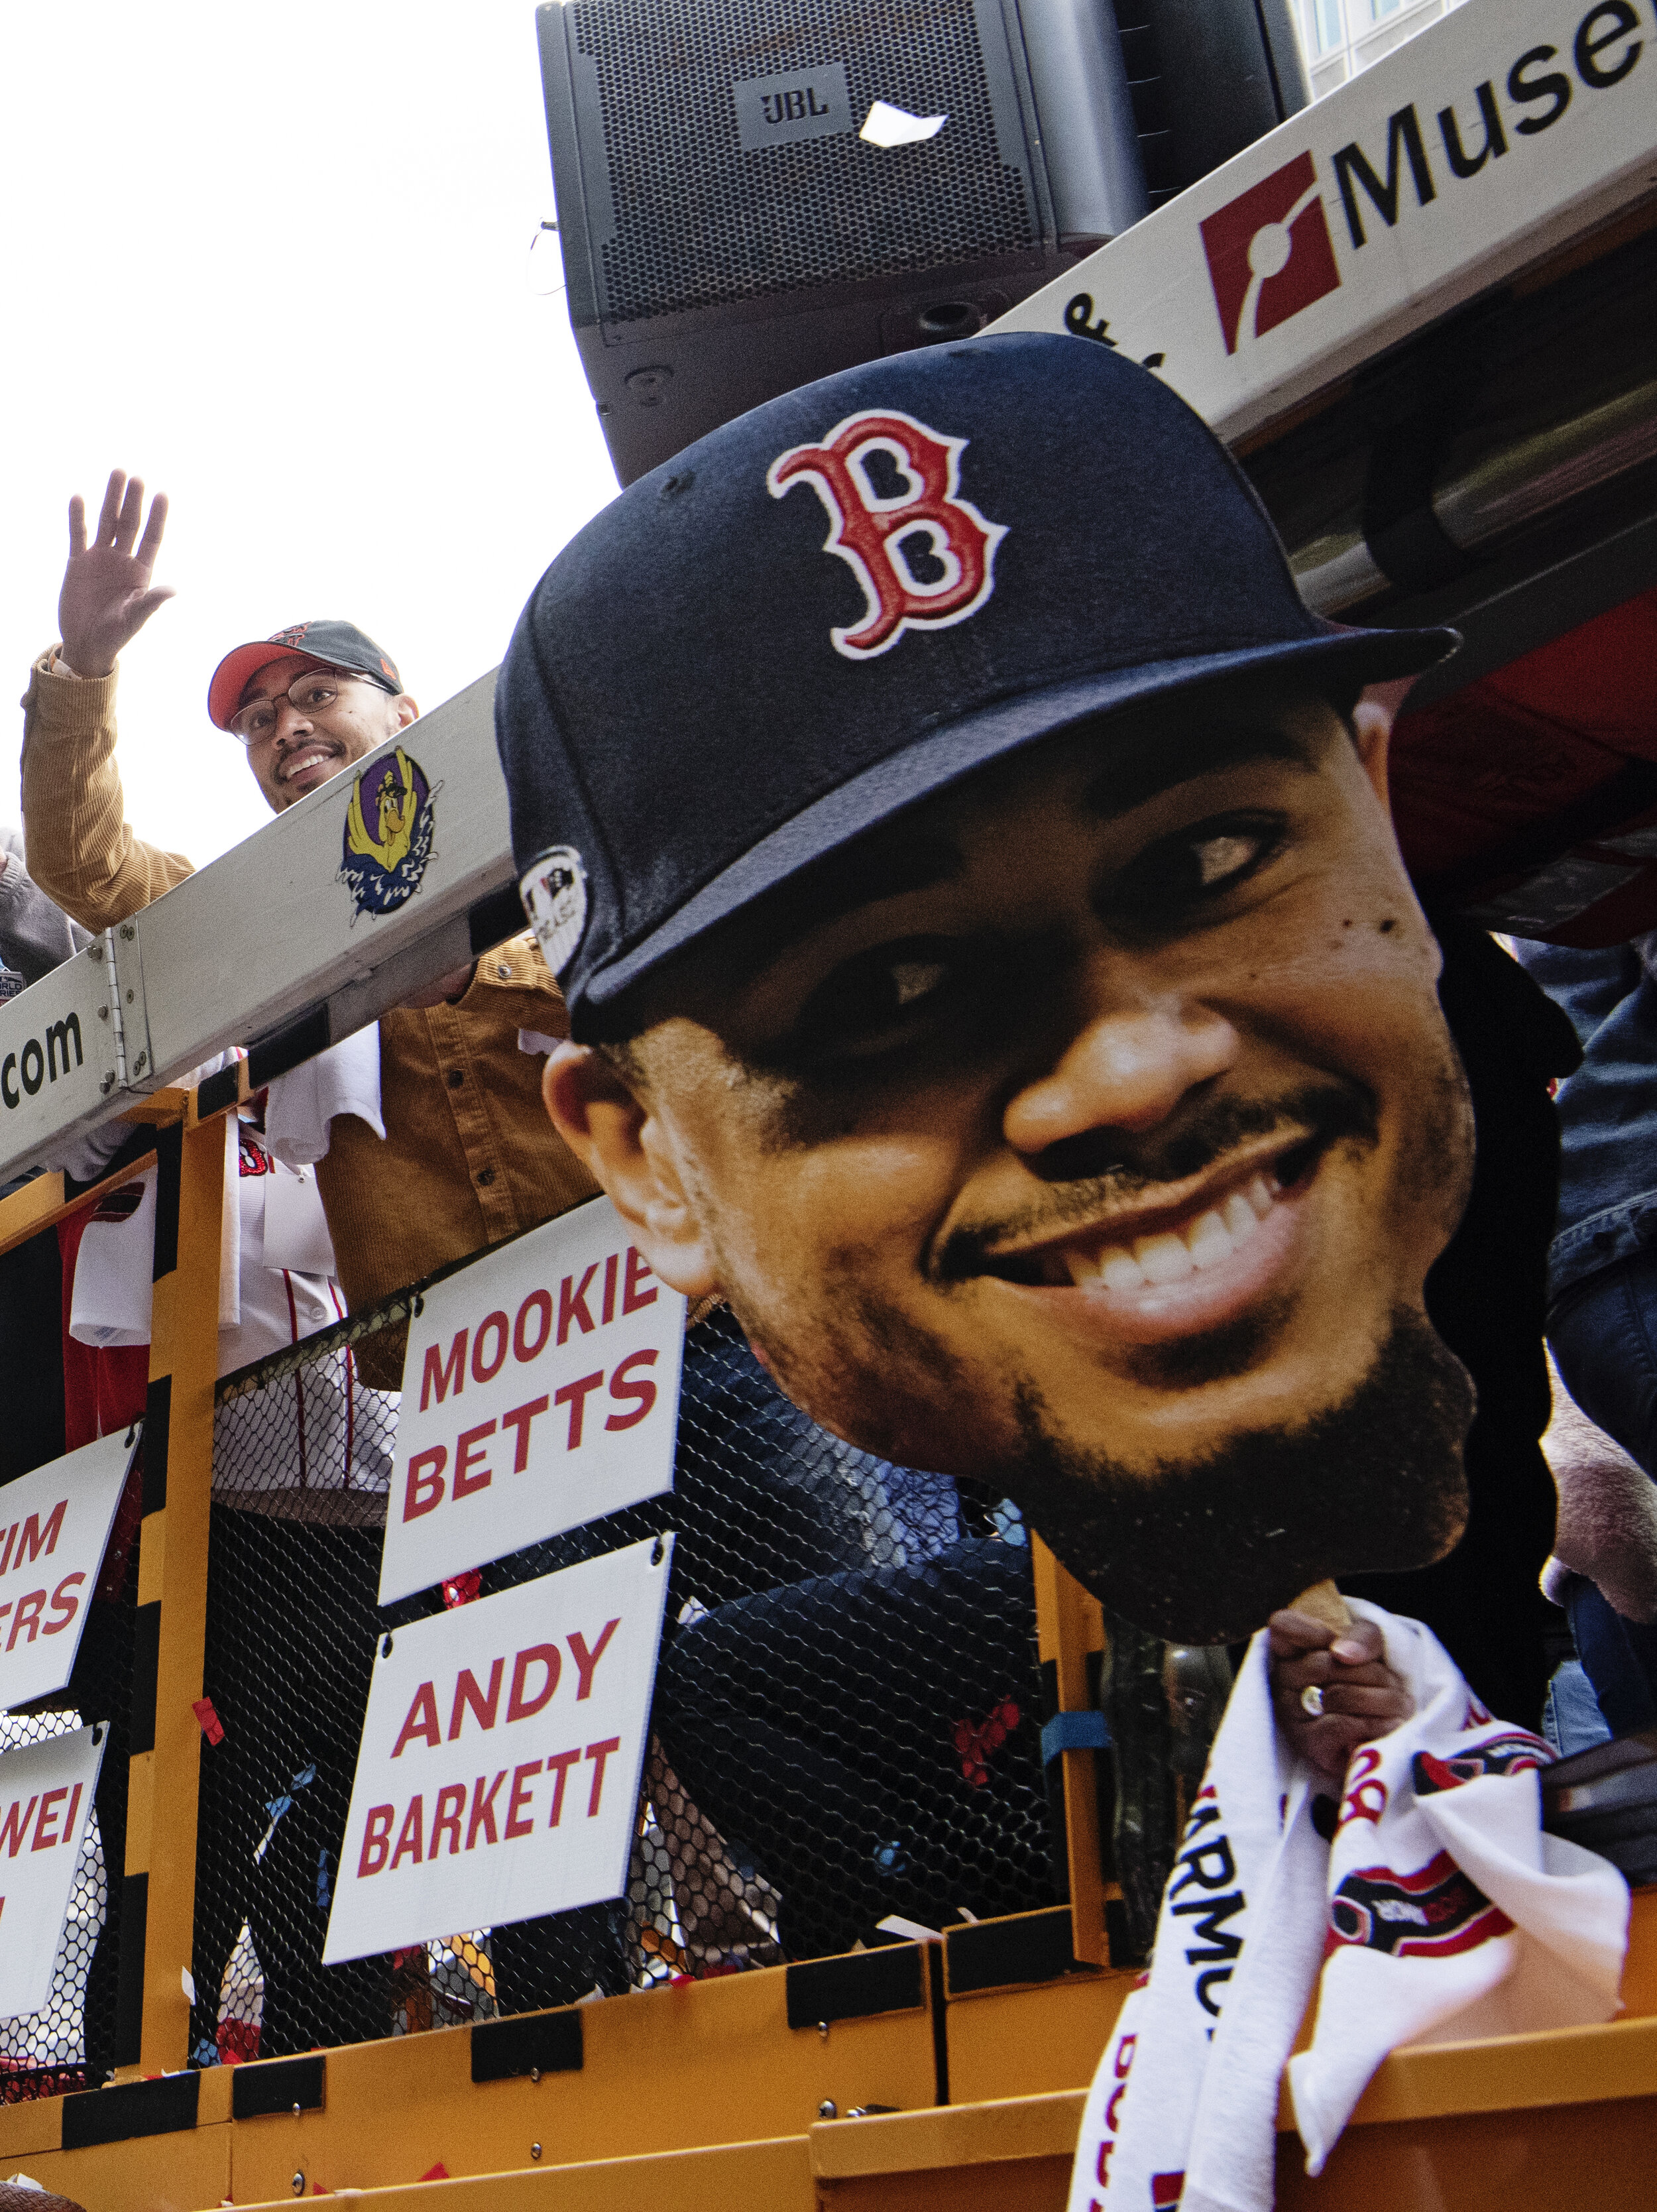  Mookie Betts #50 of the Boston Red Sox waves to crowds gathered in downtown Boston, Massachusetts, for the World Series Champions parade on October 31, 2018. 